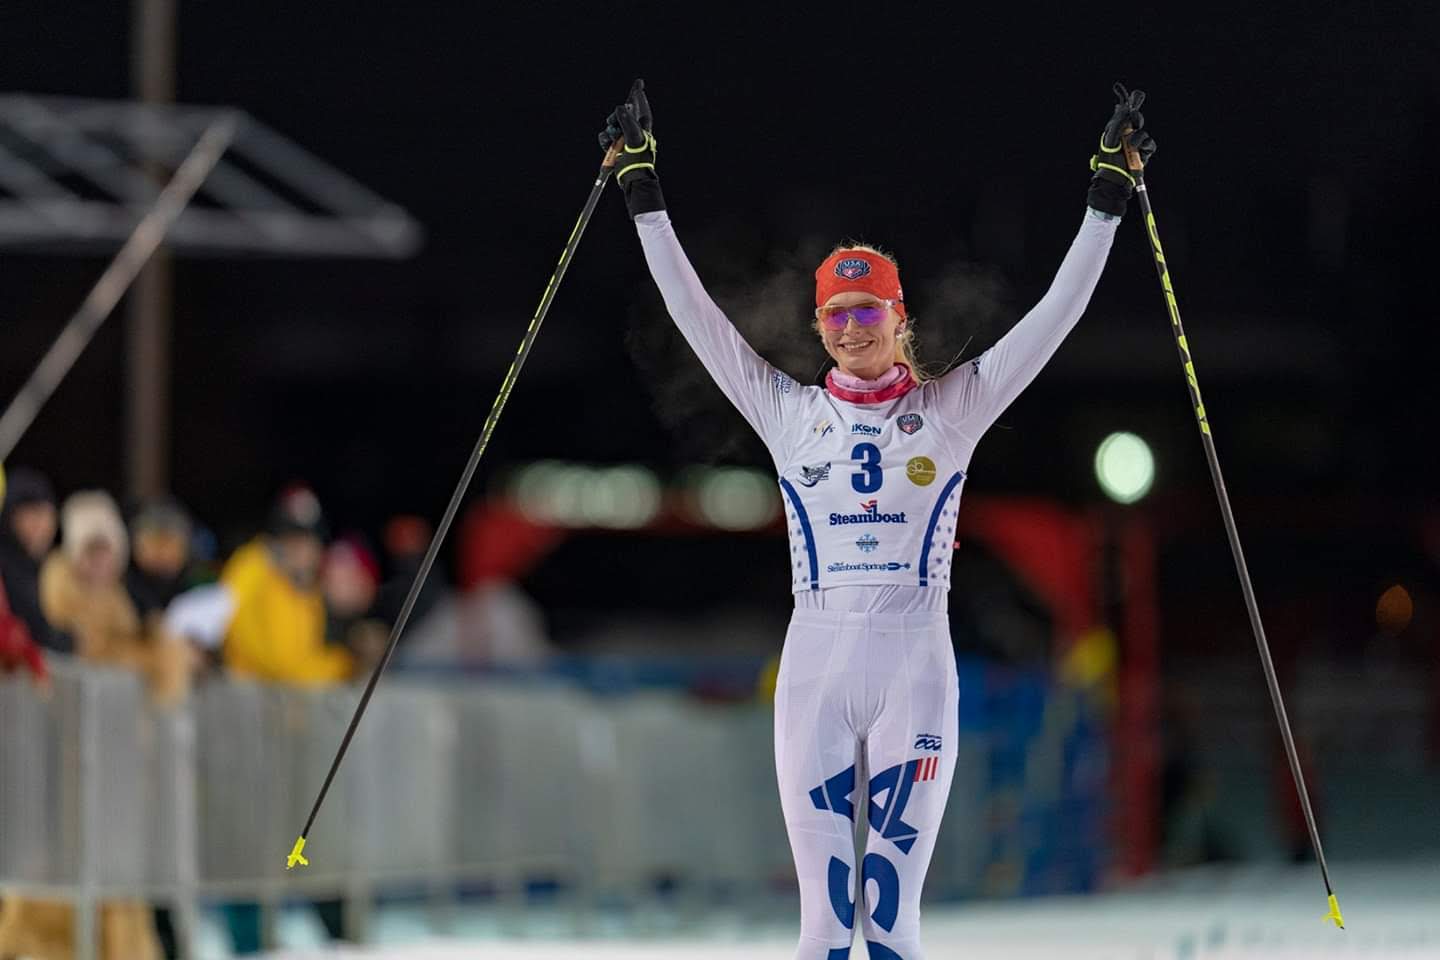 Tara Geraghty-Moats, the Undefeated Women’s Nordic Combined Pioneer